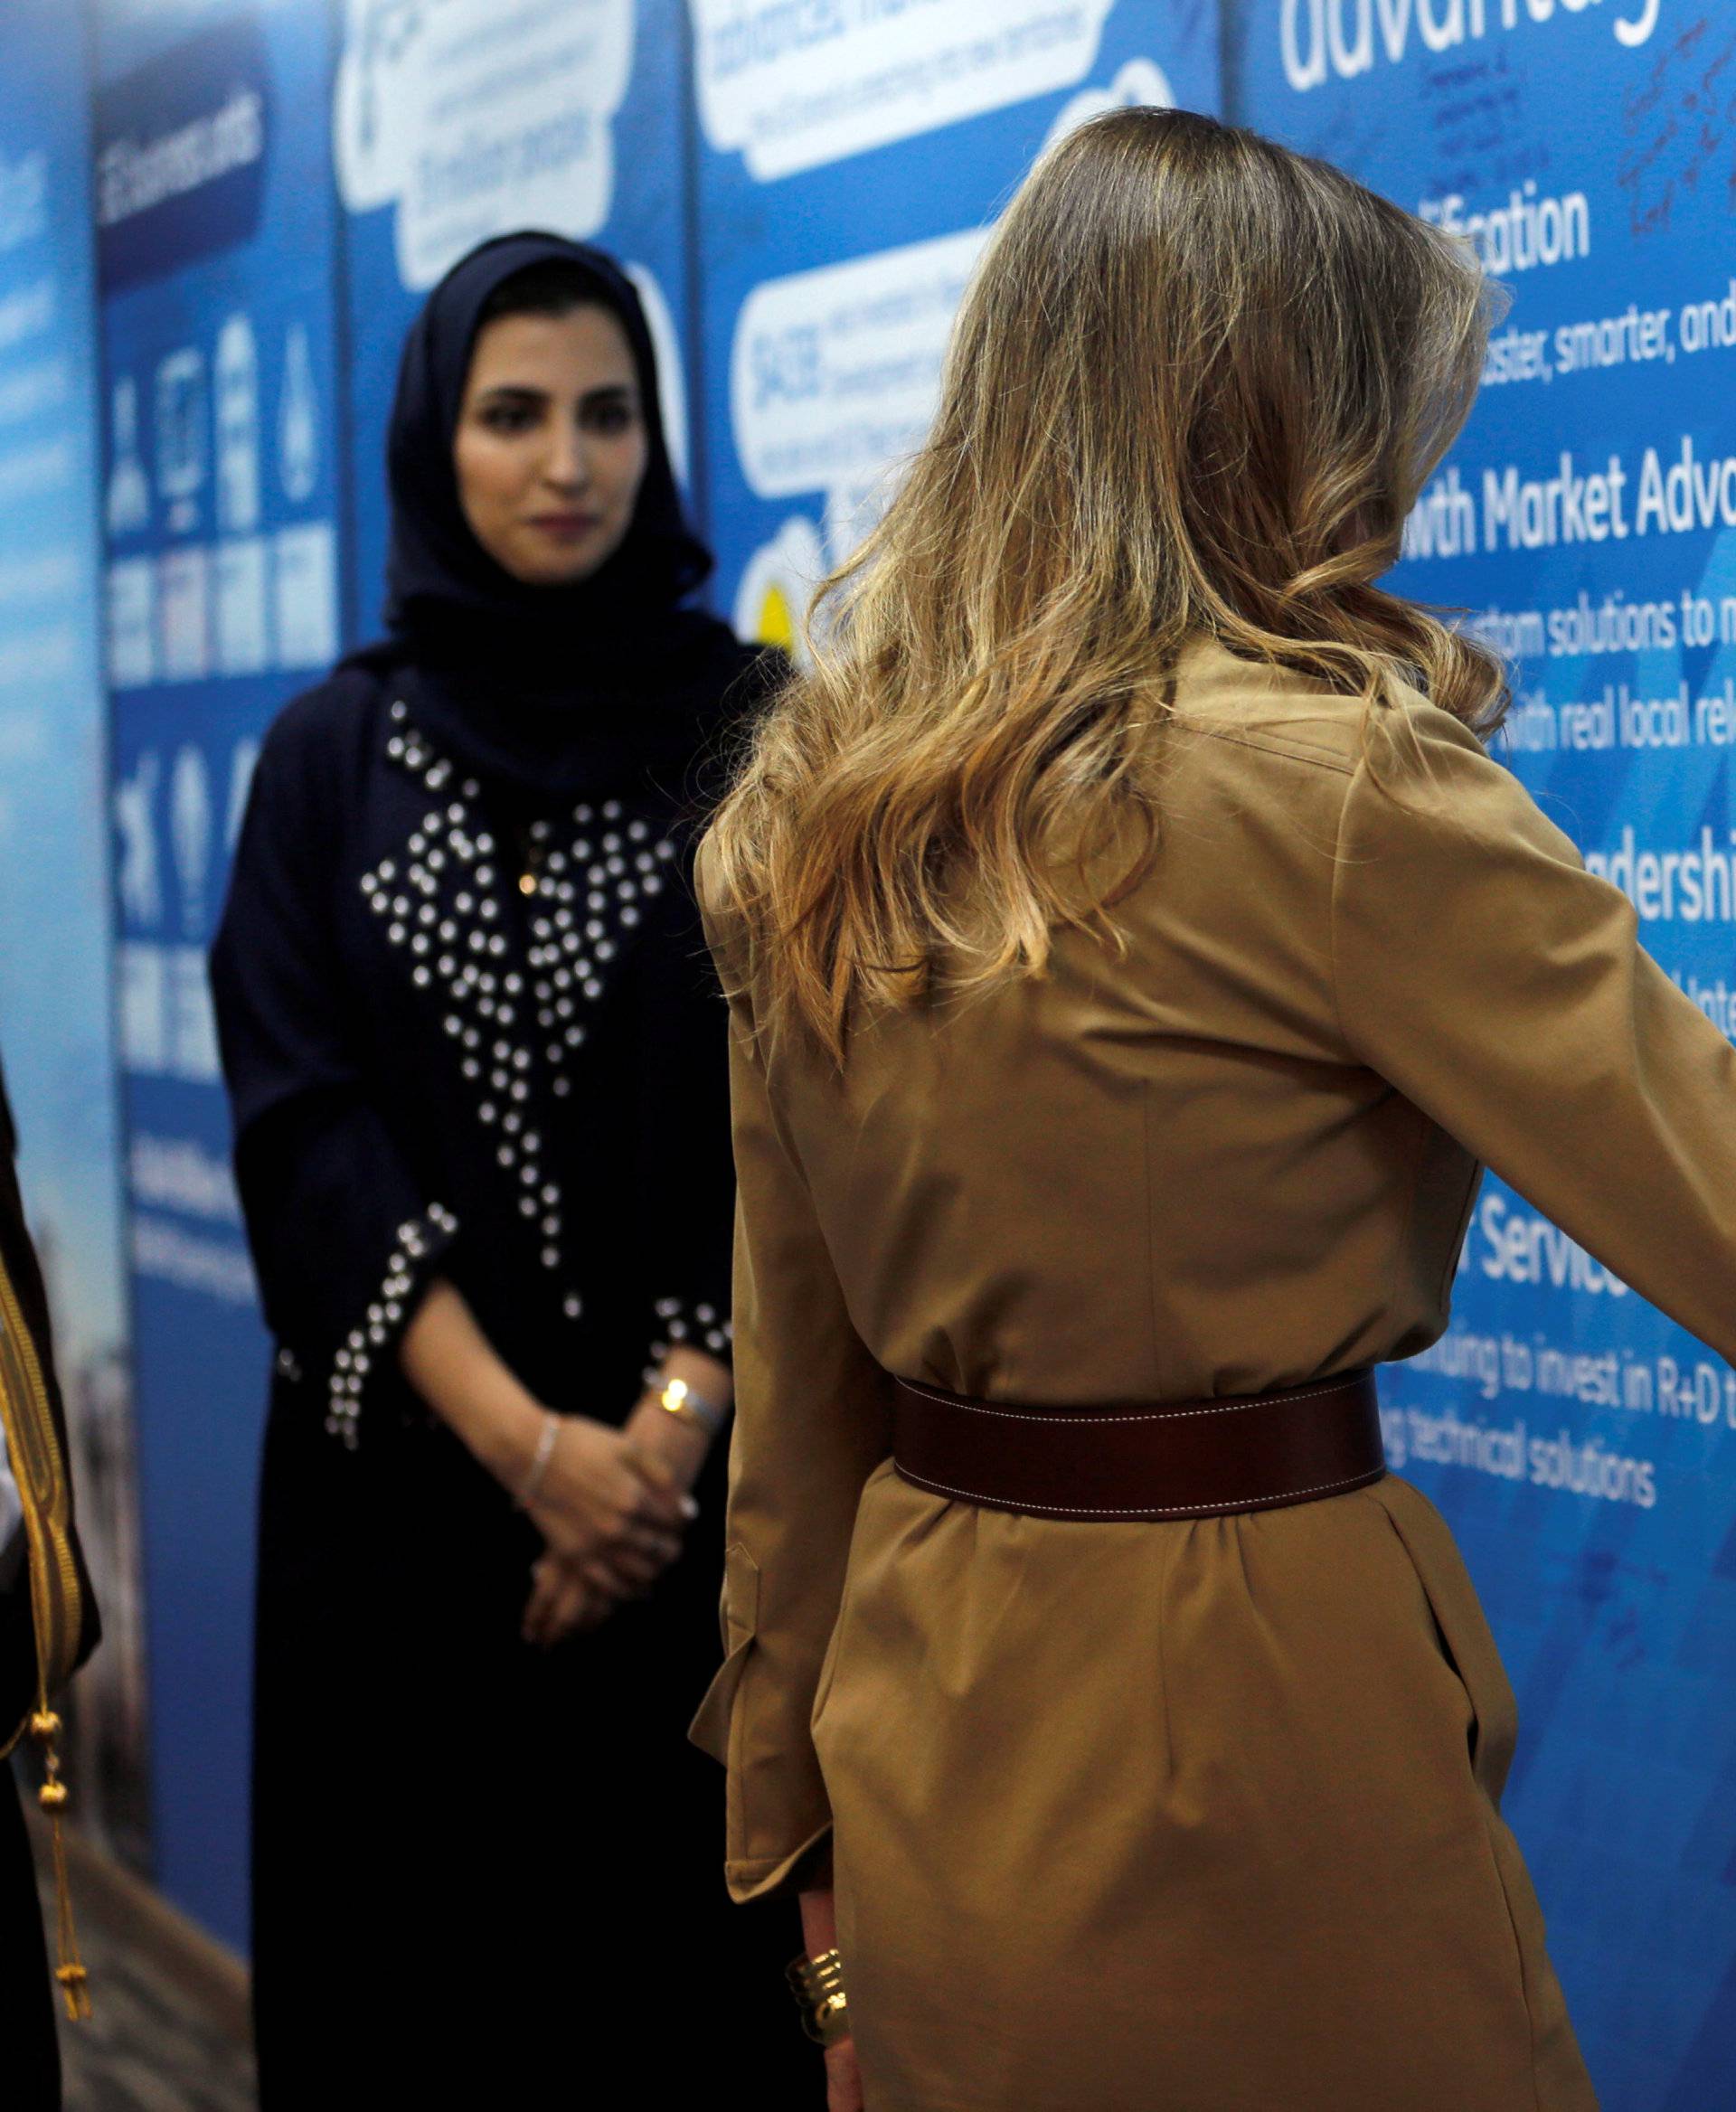 First lady Melania Trump writes as she visits GE All women business process service center in Riyadh